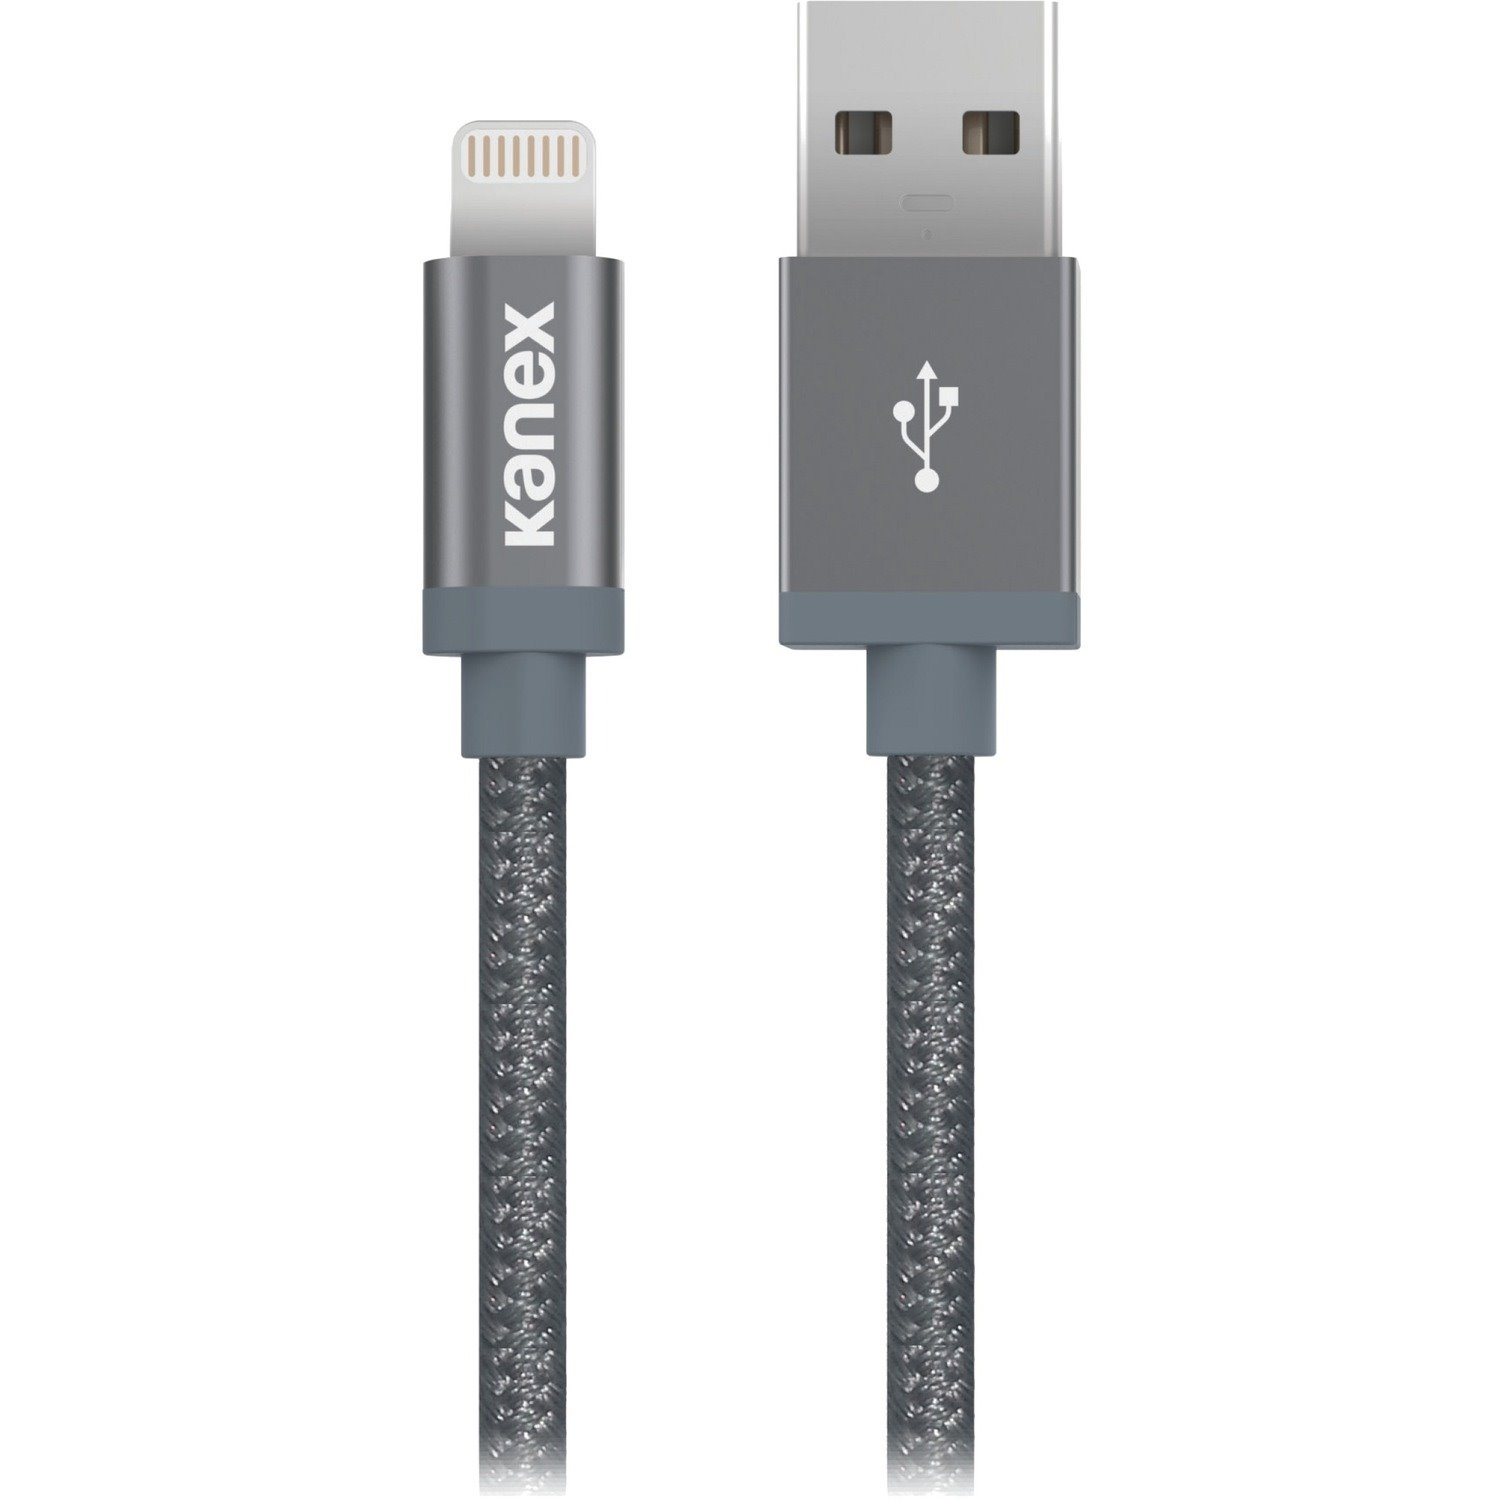 Kanex Lightning/USB Sync/Charge Data Transfer Cable